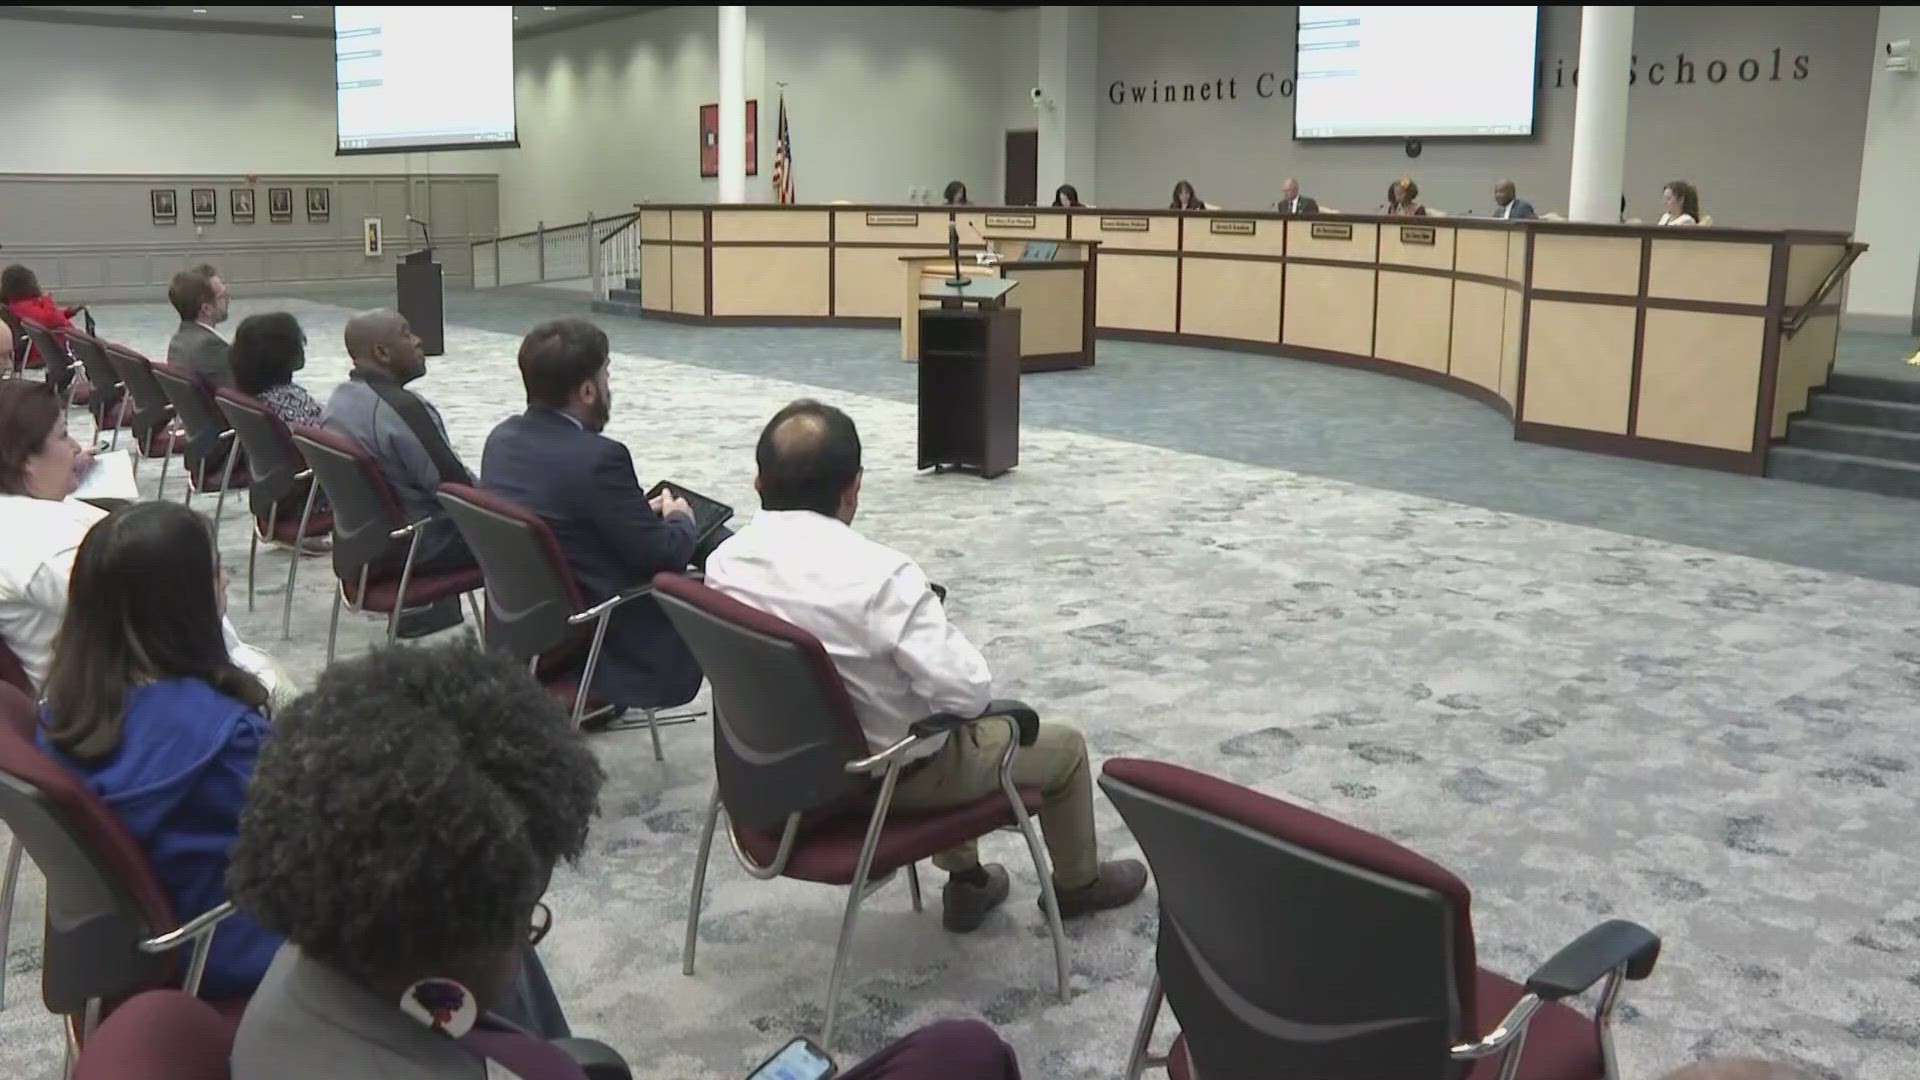 The Gwinnett County School Board decided Thursday night not to vote on the plan, yet.